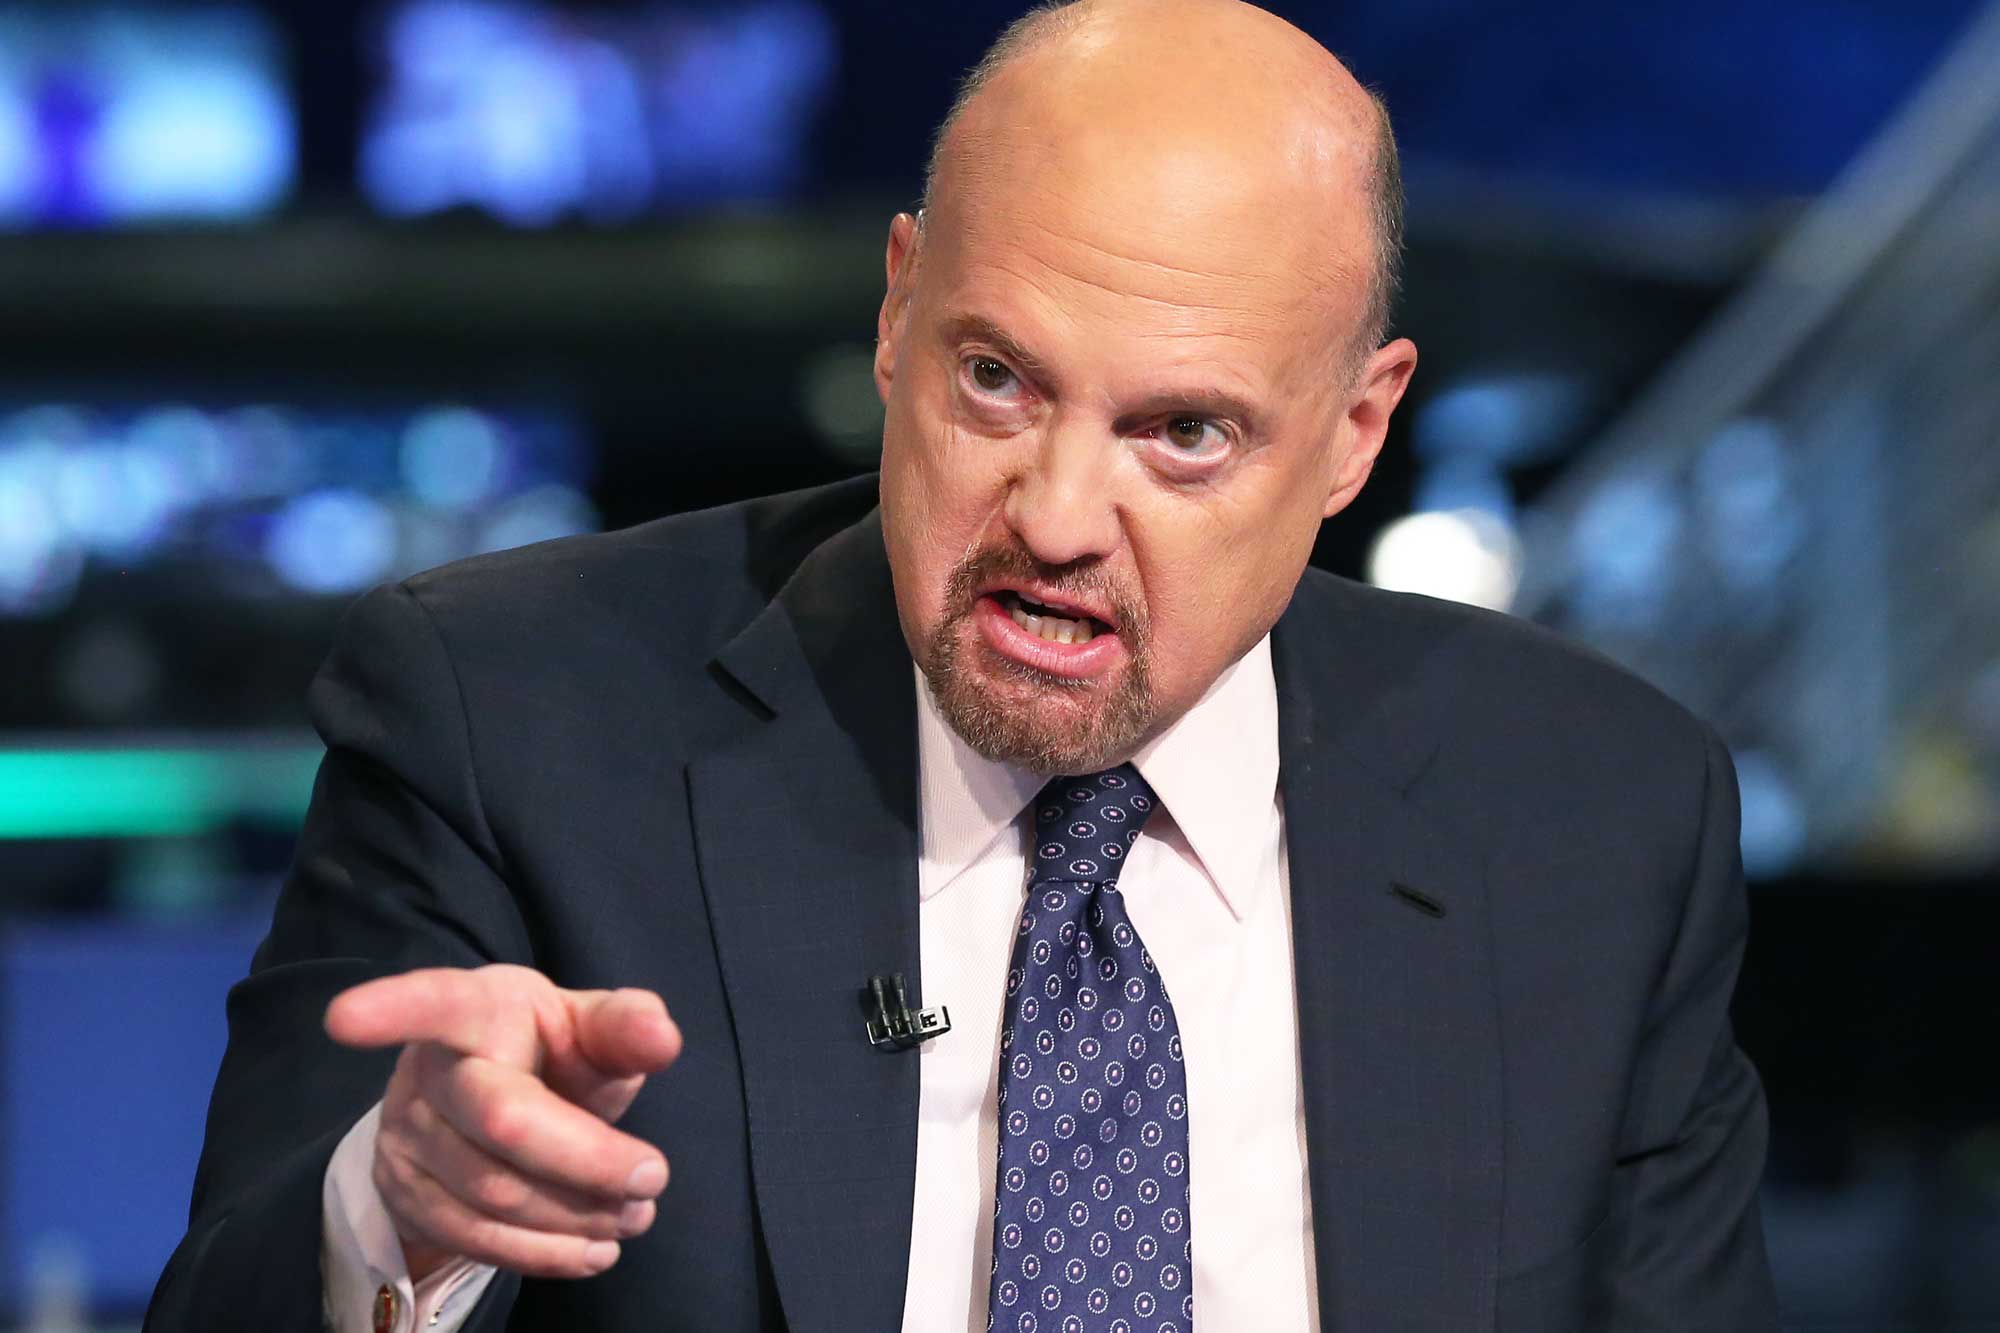 Jim Cramer sees positives for buyers after sell-off on Covid fears